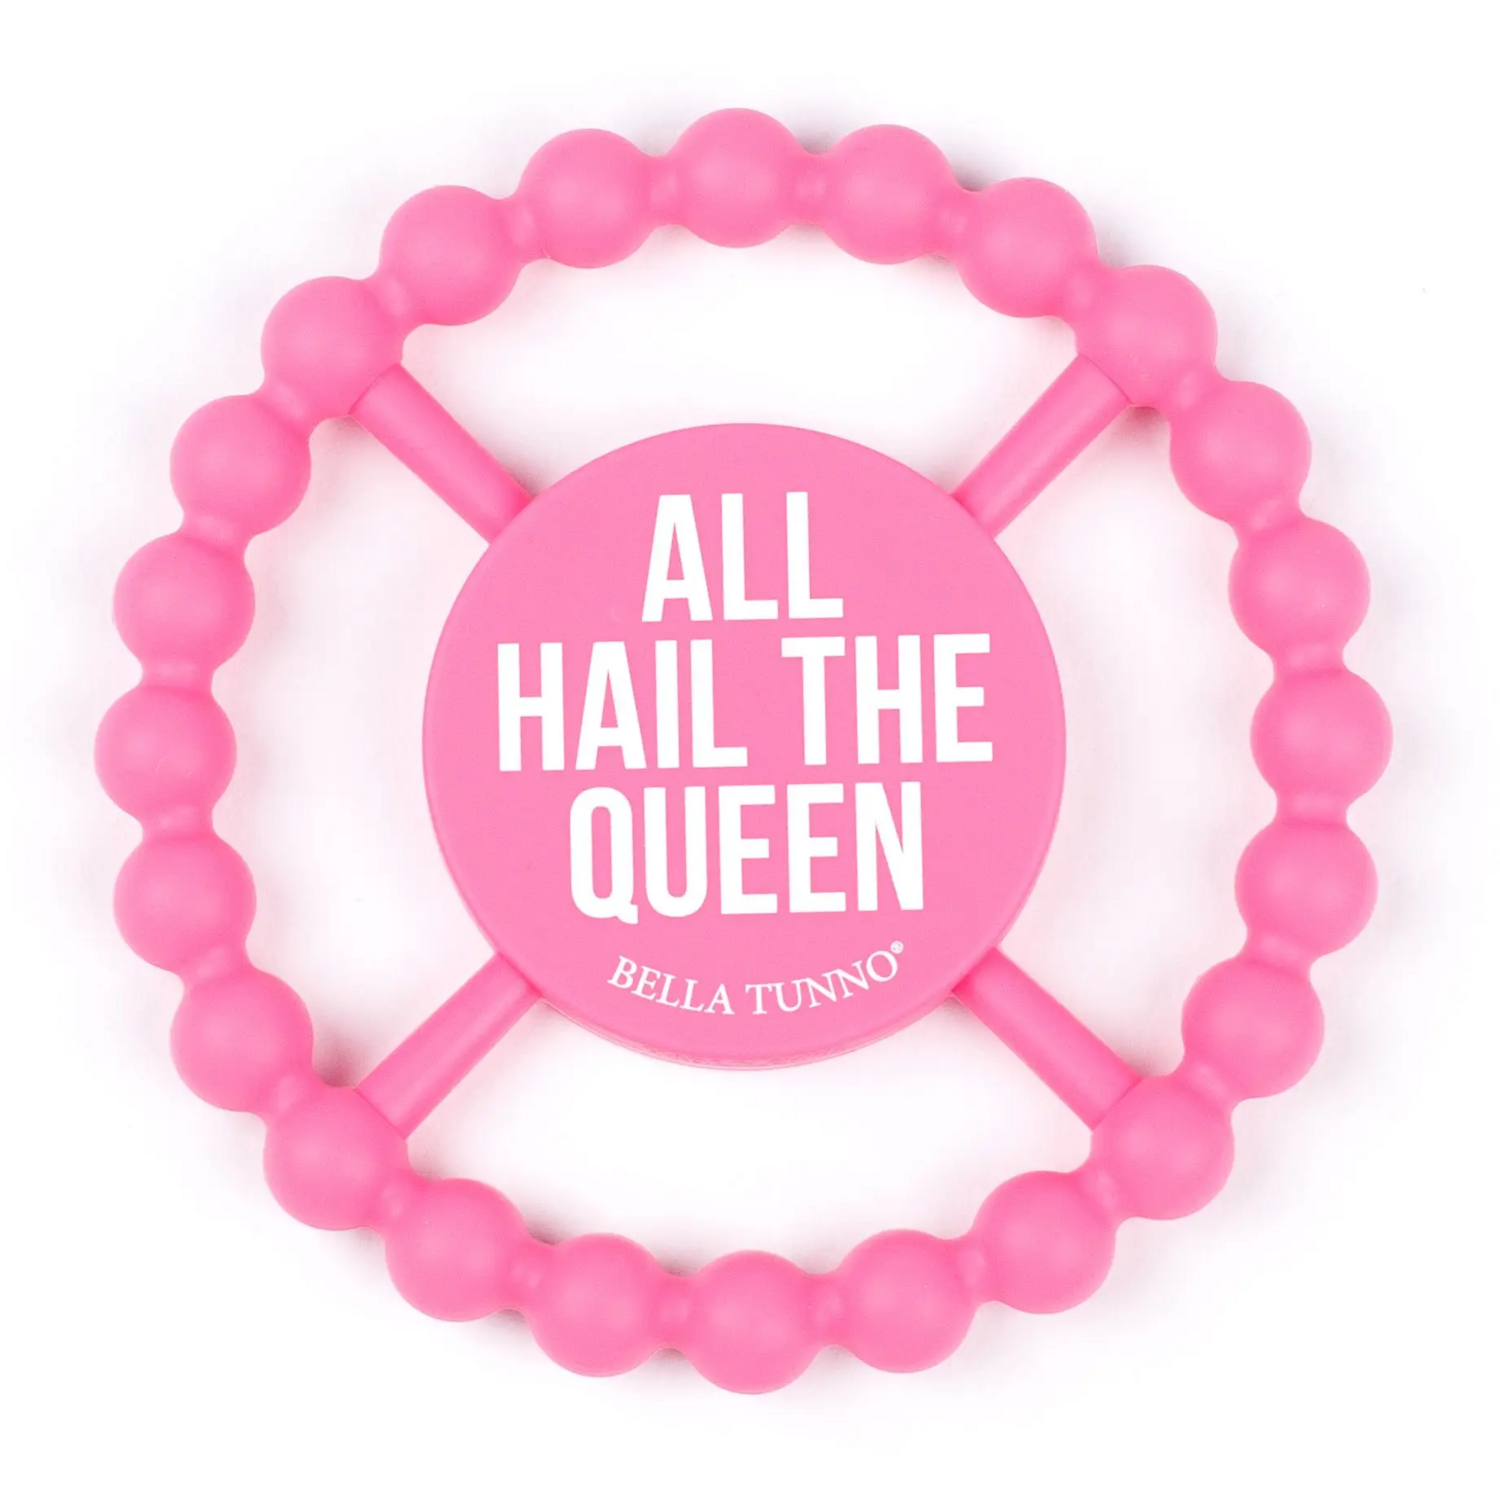 All hail the queen teether